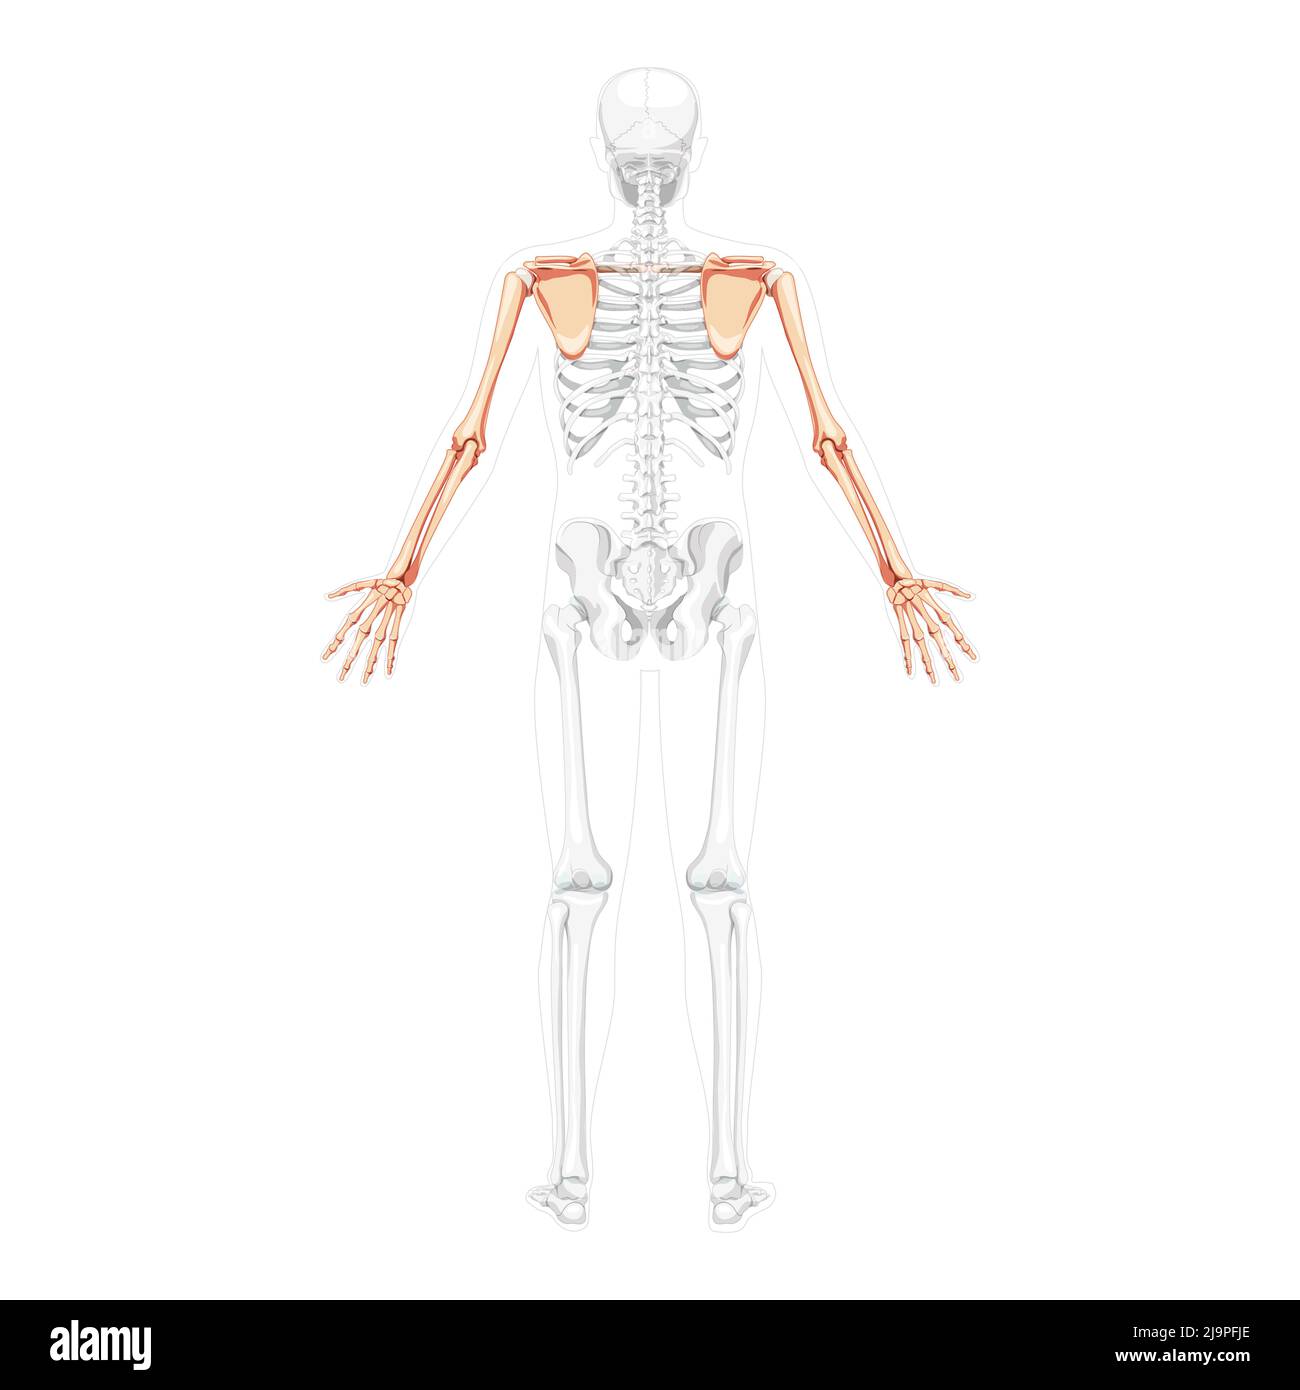 Skeleton upper limb Arms with Shoulder girdle Human front view with two arm  poses with transparent bones position. Forearms realistic flat Vector  illustration of anatomy isolated on white background Stock Vector Image